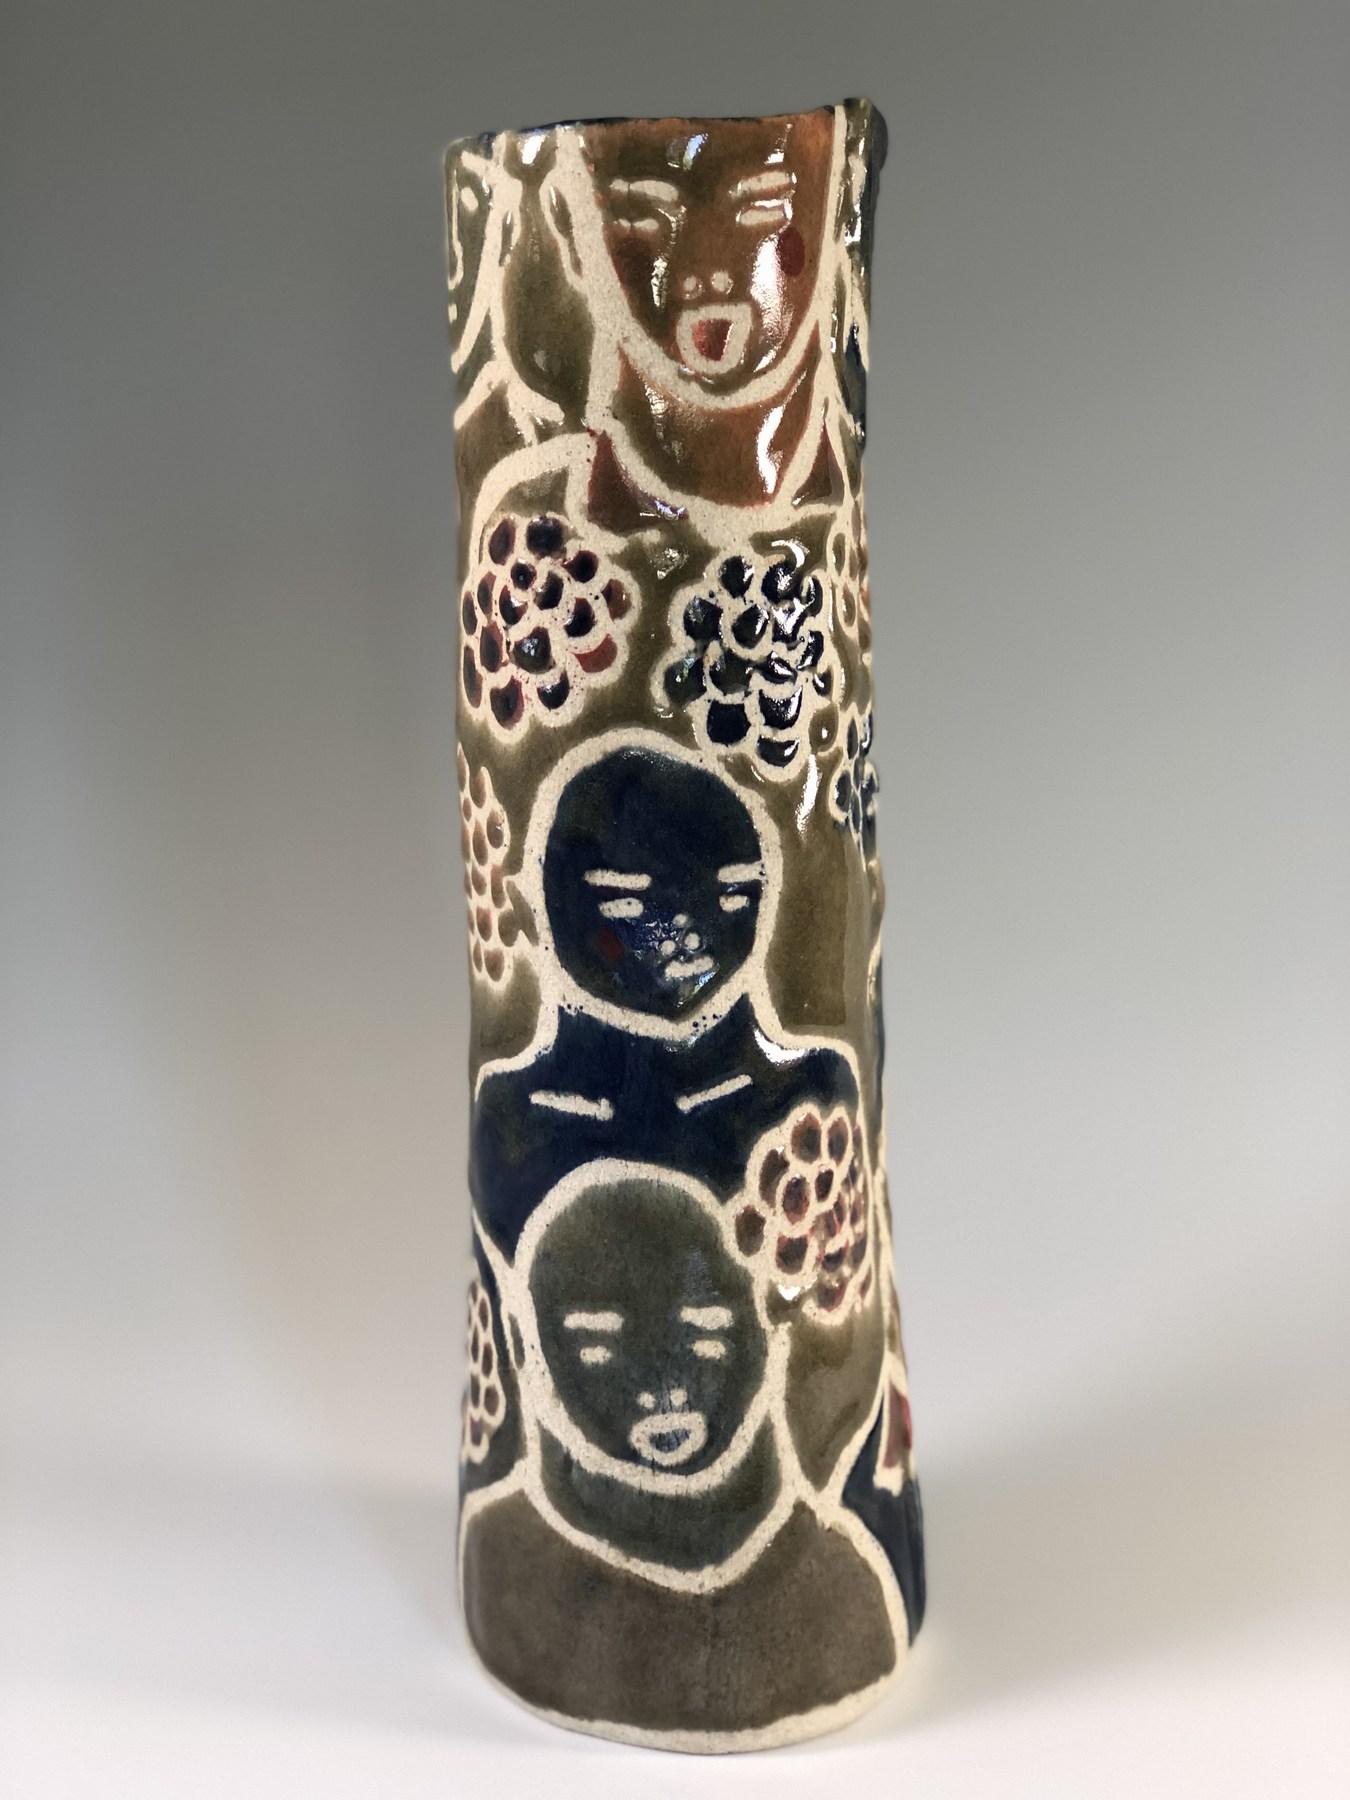 Tall Cylinder with People and Flowers - Sculpture by Elizabeth Currer